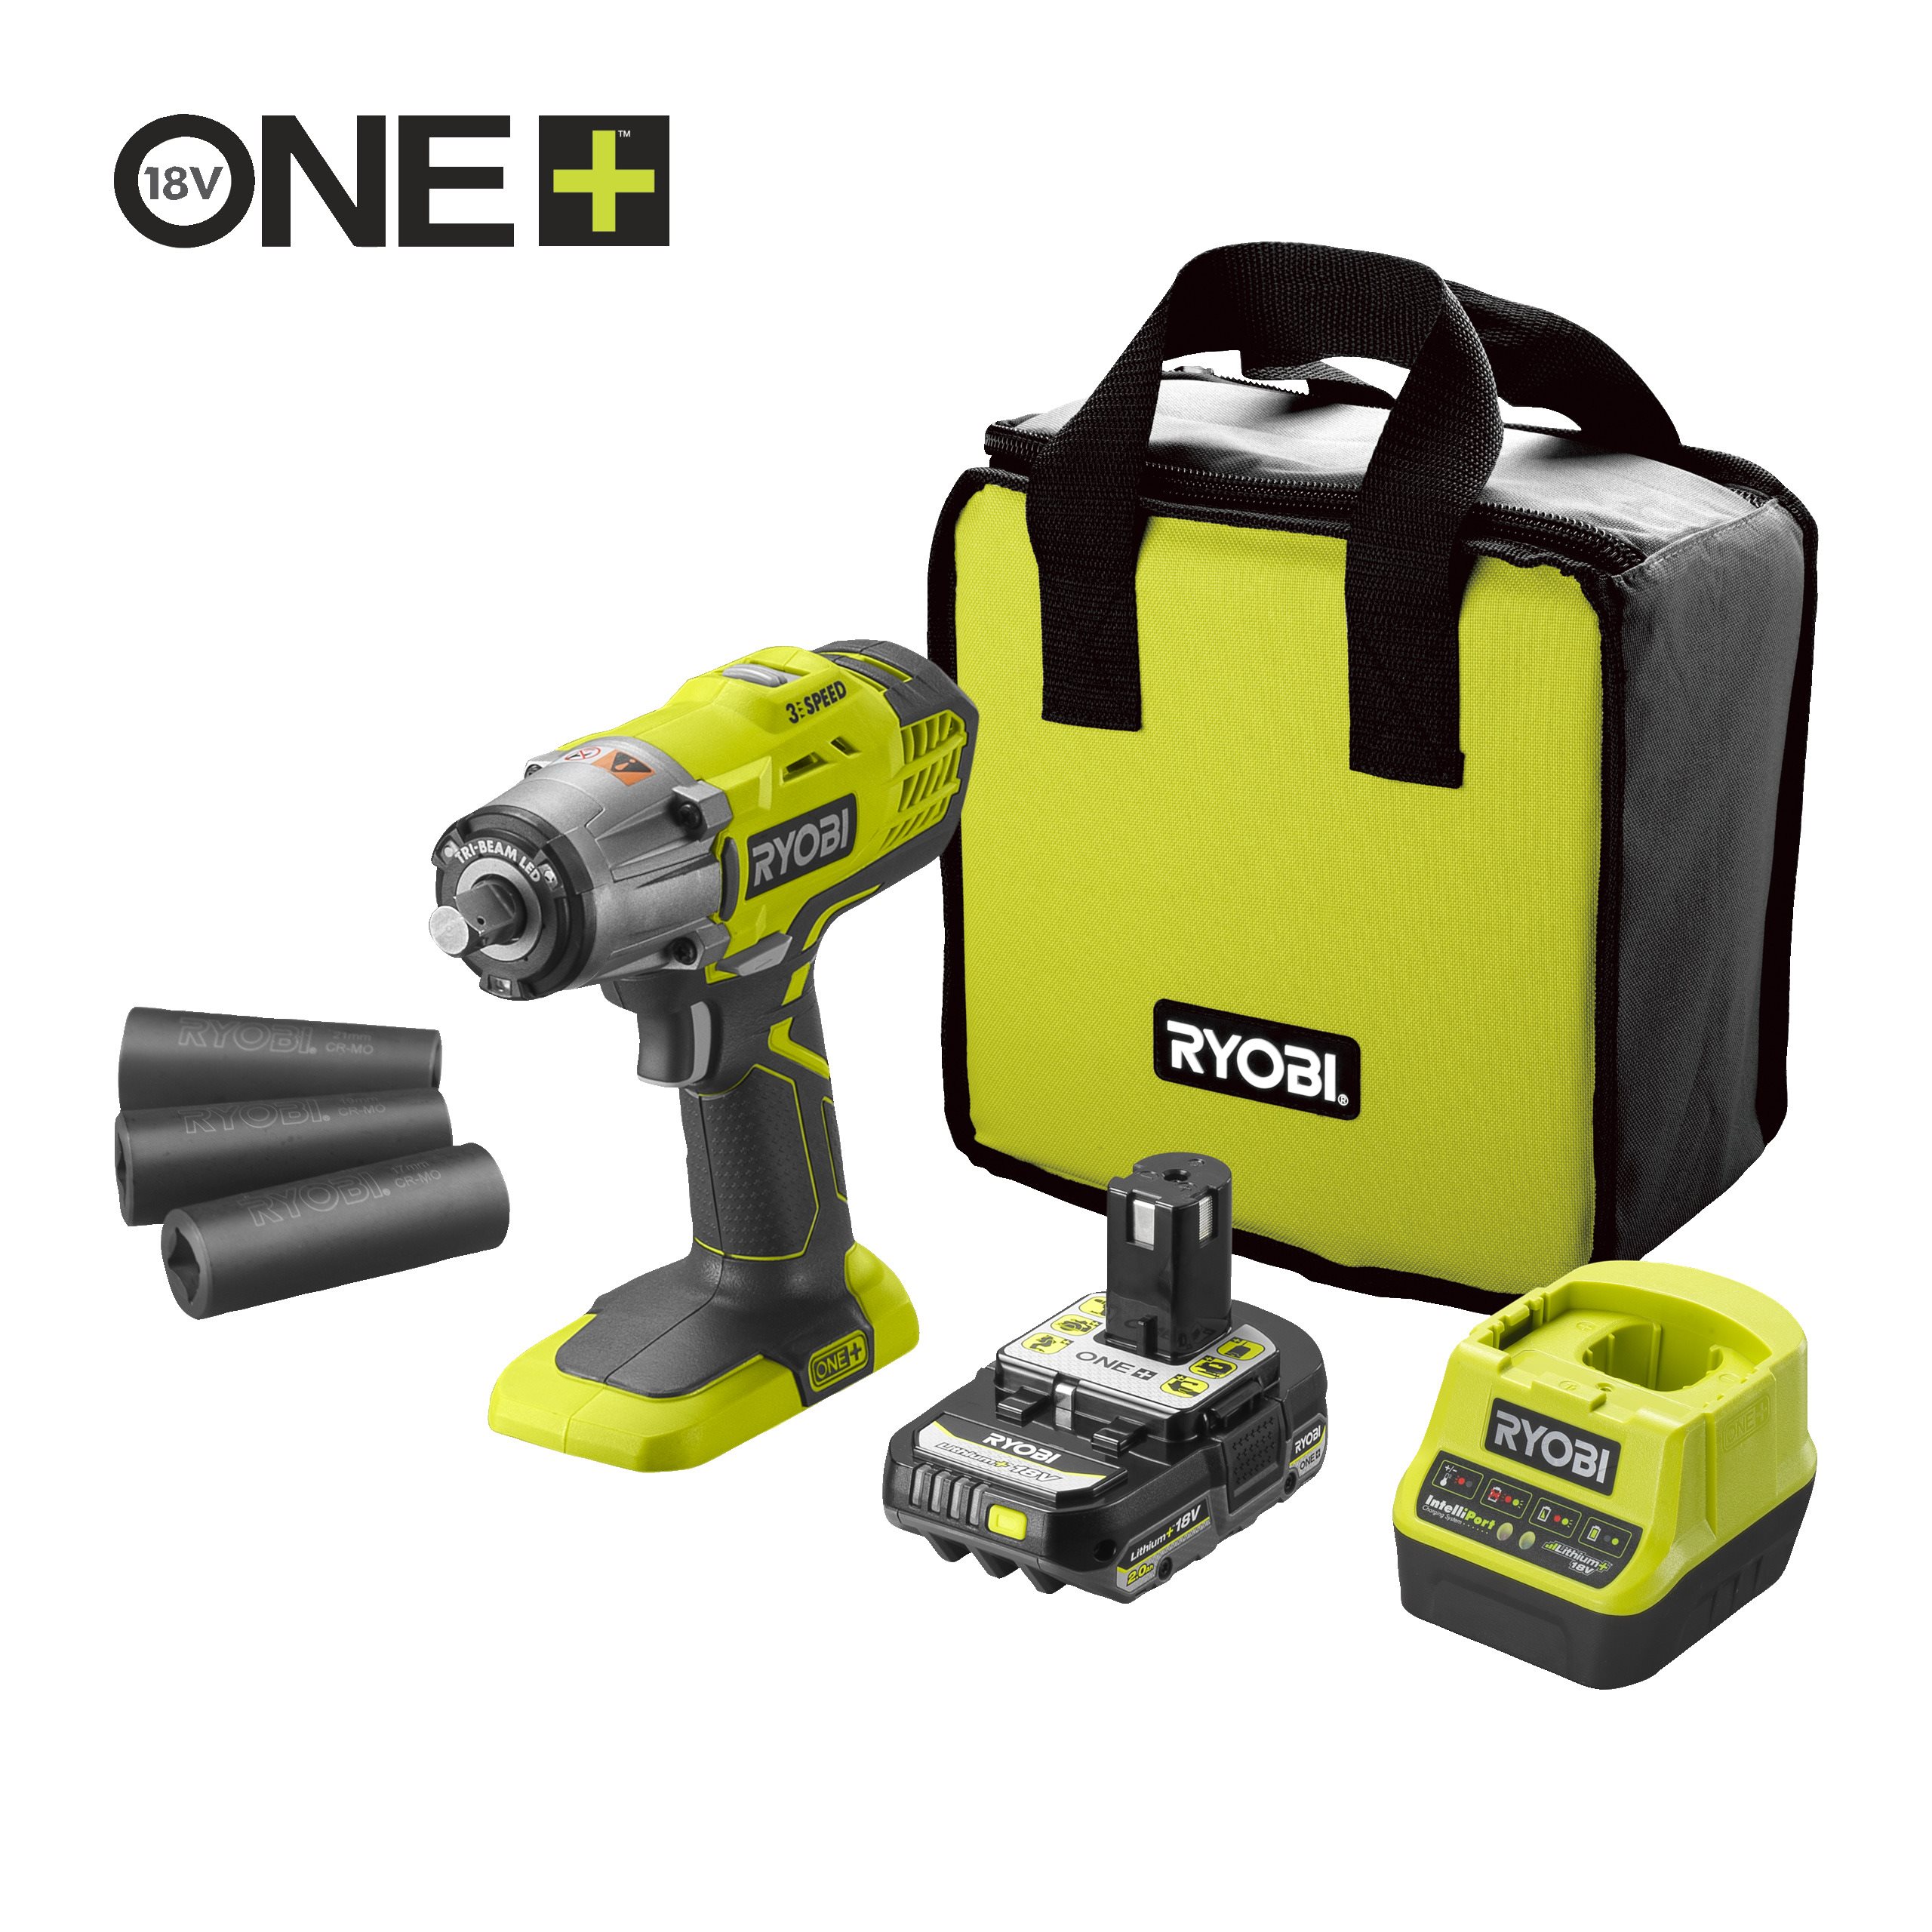 Get a Free ONE+ Tool This Christmas